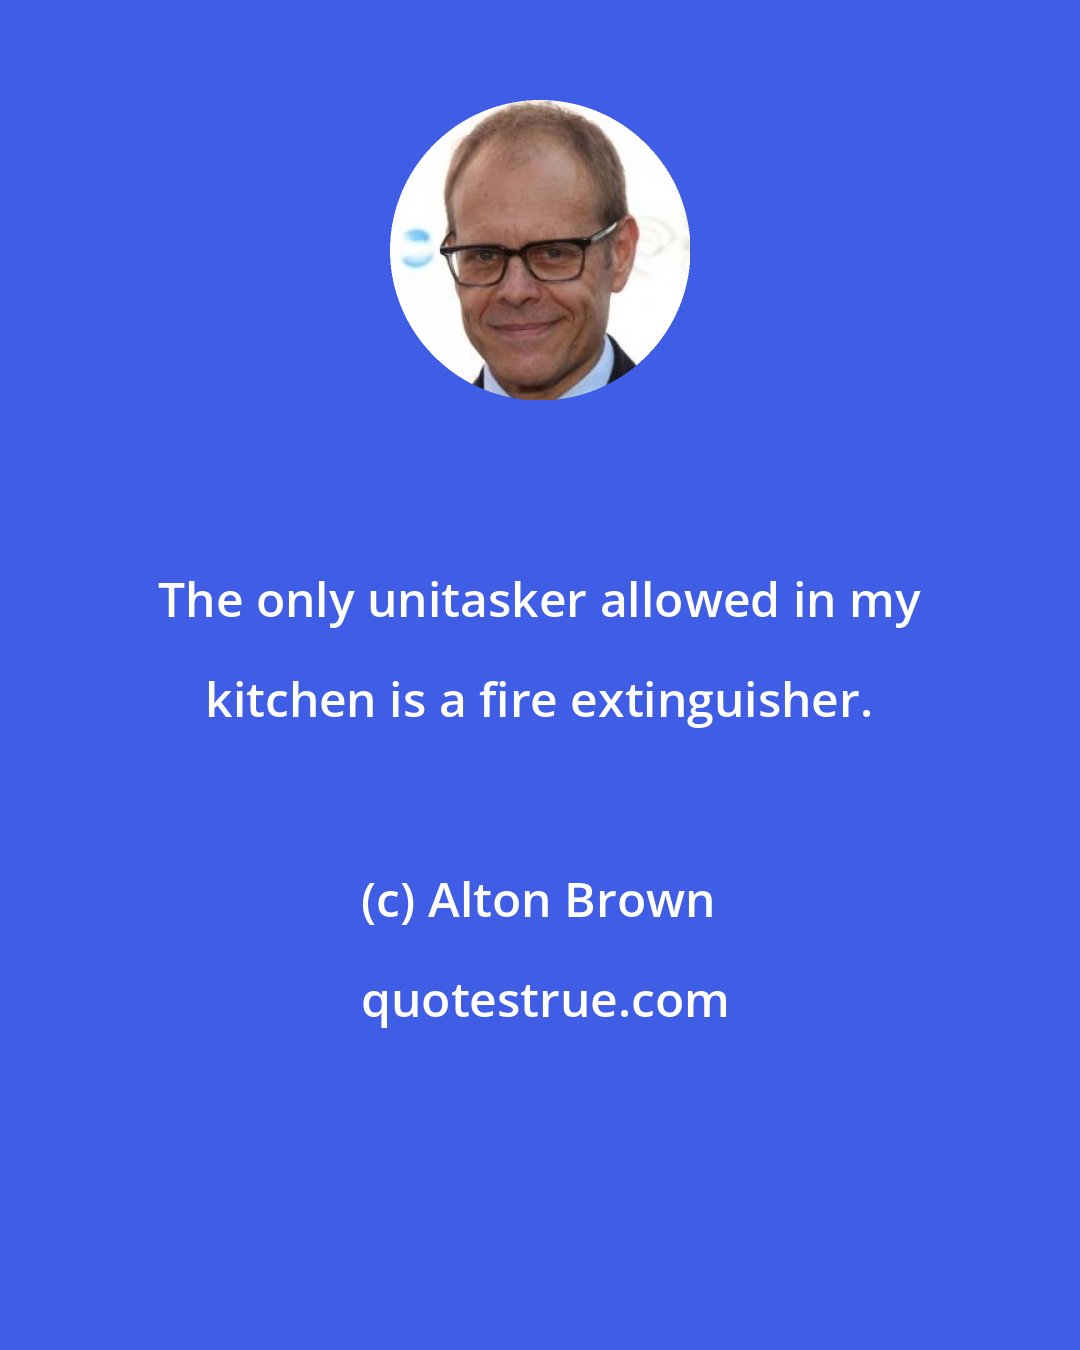 Alton Brown: The only unitasker allowed in my kitchen is a fire extinguisher.